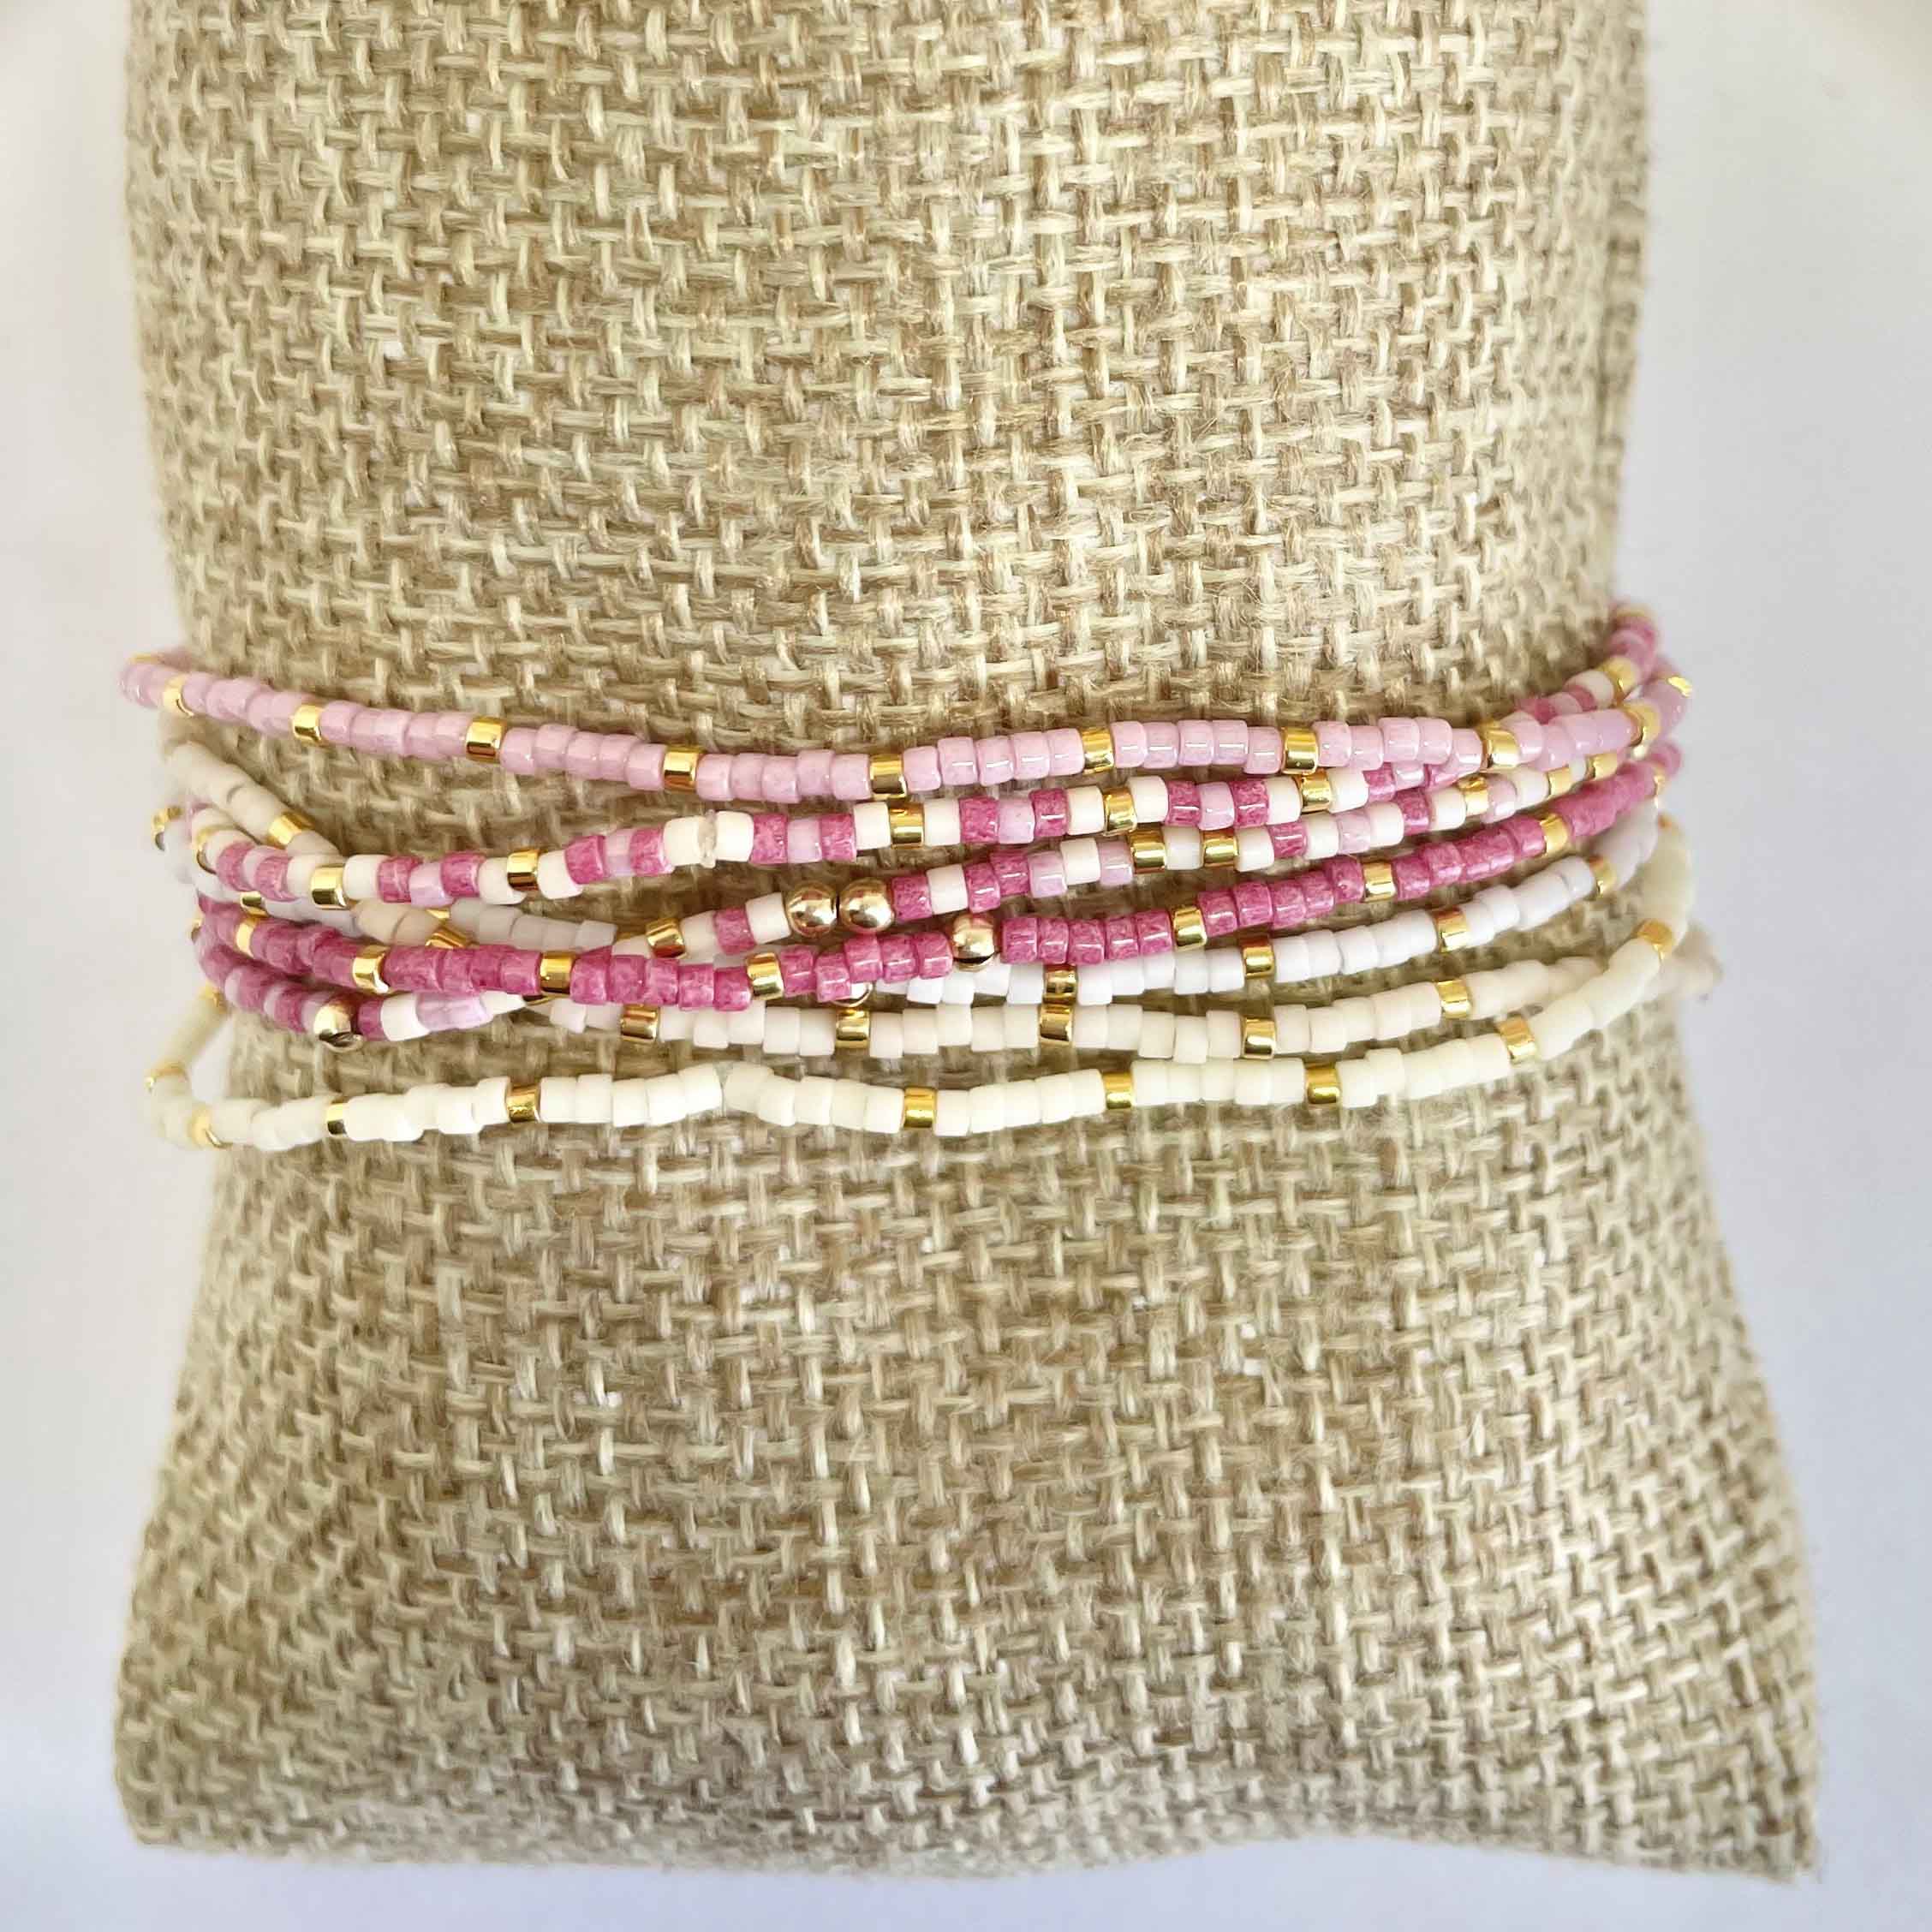 Delicate Beaded Stretch Bracelets Set of 7 in Winter Beach Colorway -  Fuession Jewelry